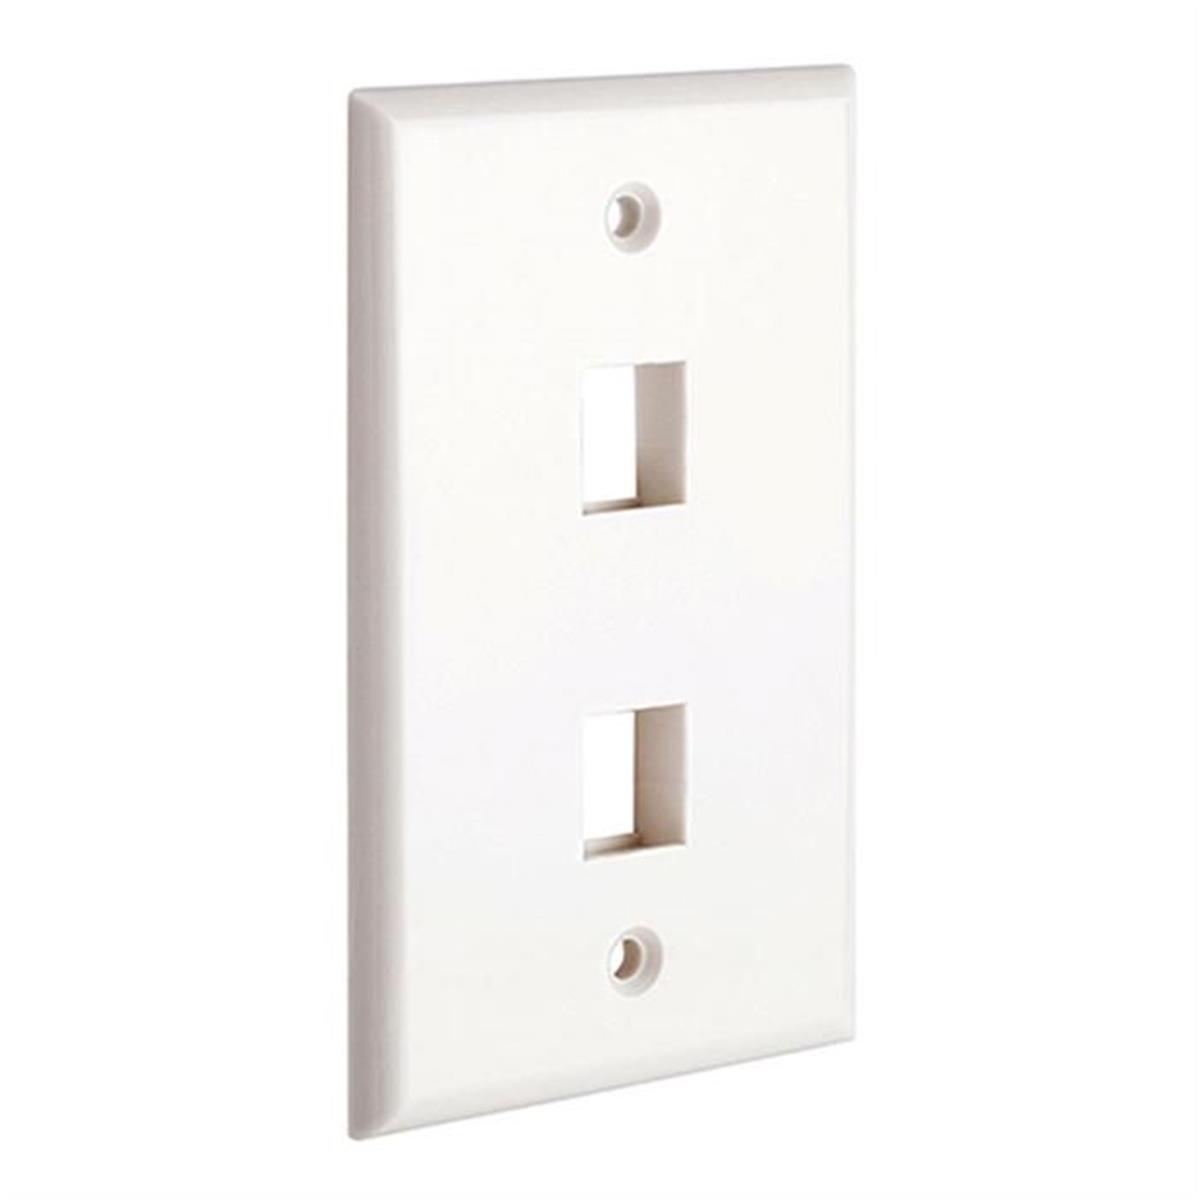 Picture of CMPLE 627-N Keystone Jack Wall Plate With Two Holes Standard Keystones - White